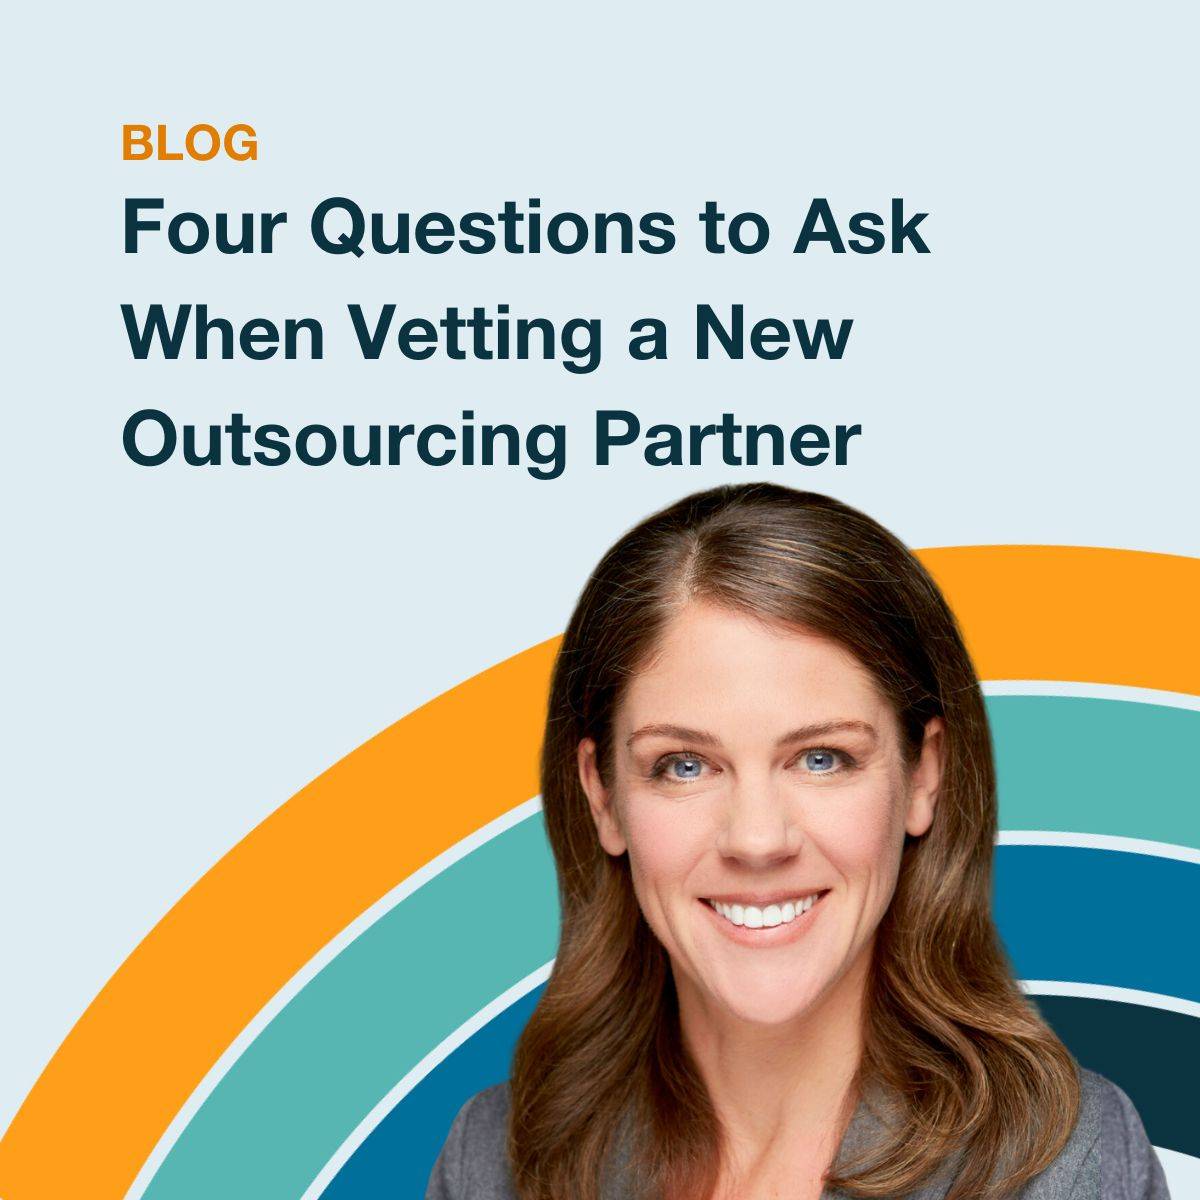 Four Questions to Ask When Vetting a New Outsourcing Partner